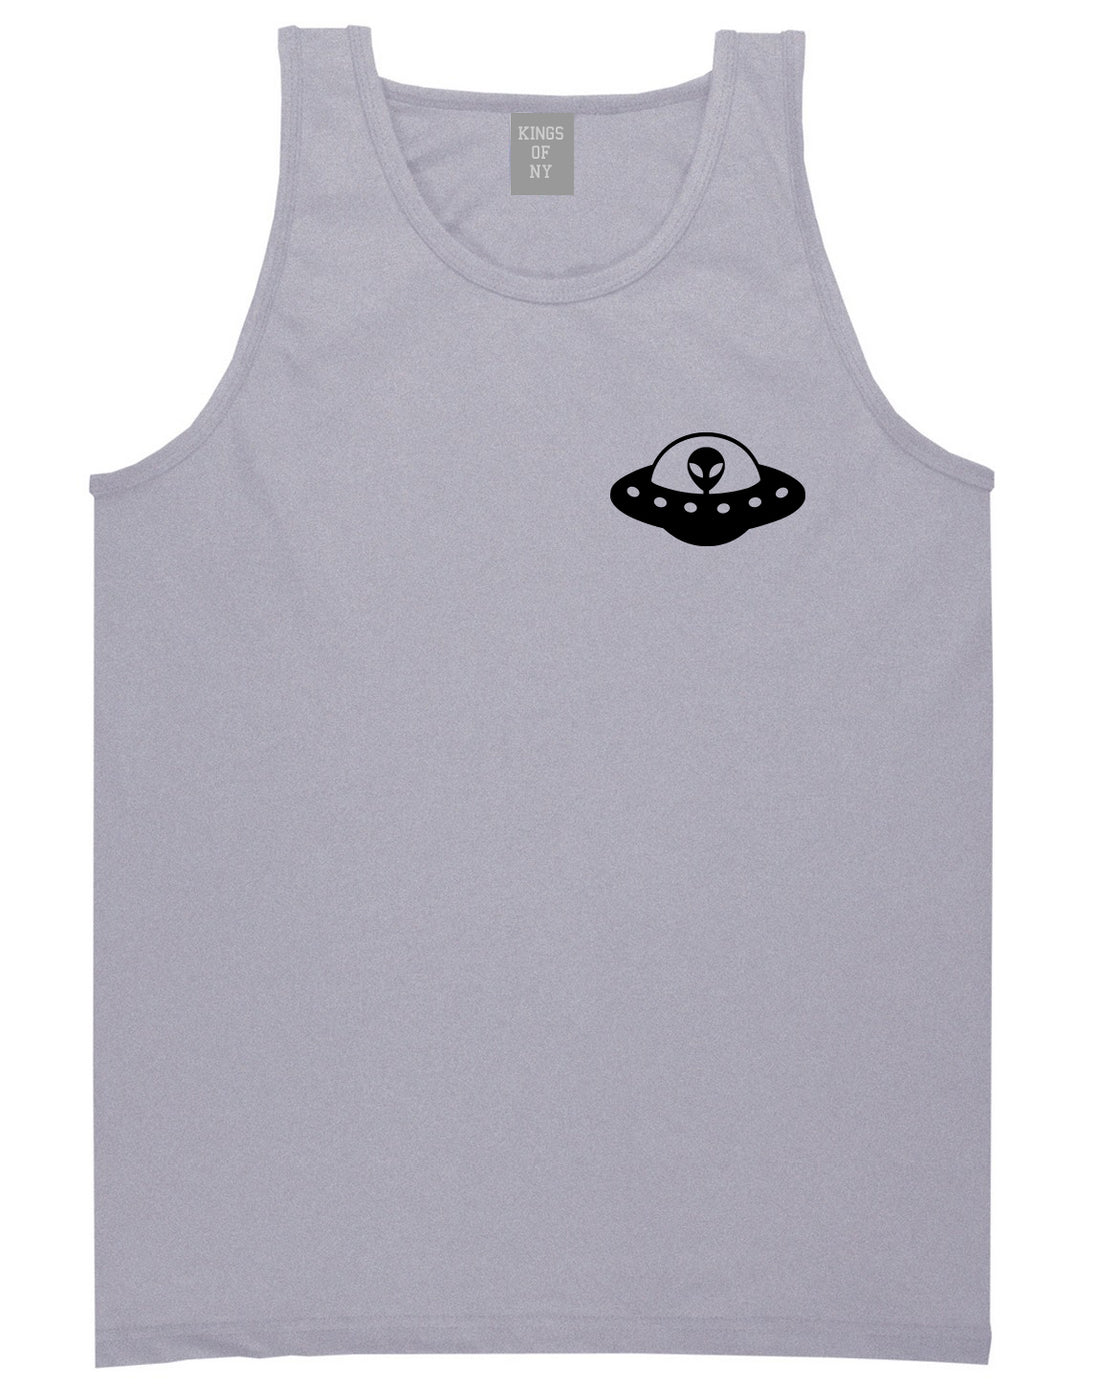 Alien_Spaceship_Chest Mens Grey Tank Top Shirt by Kings Of NY